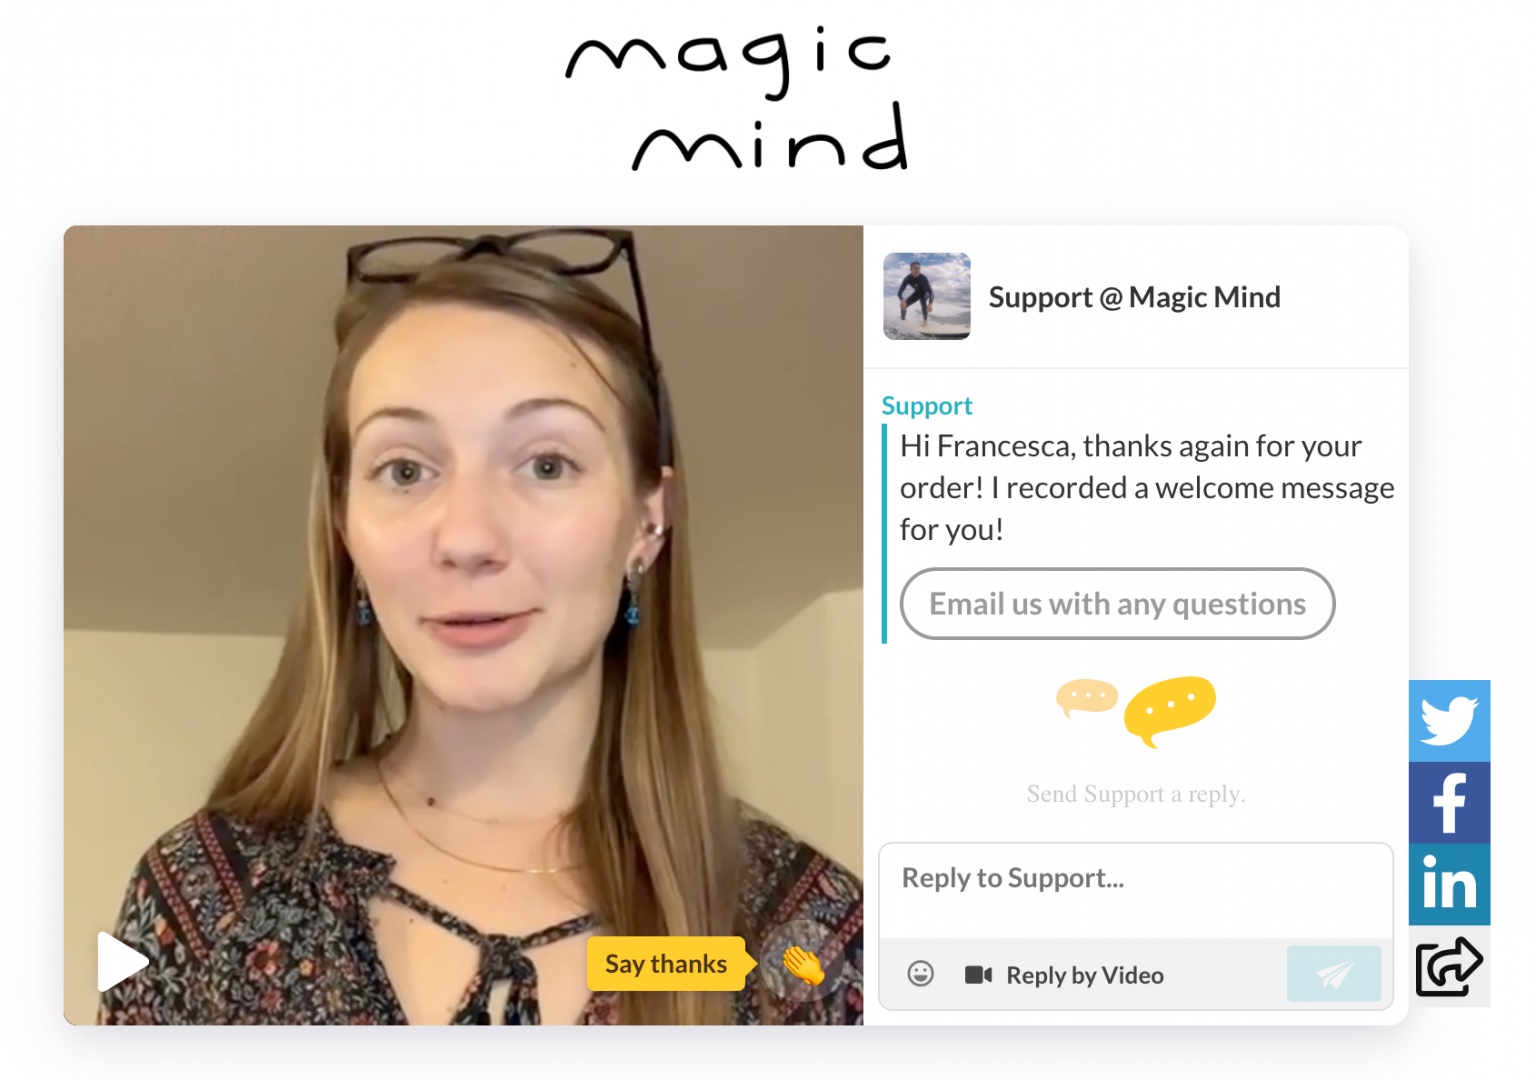 Customer service example from Magic Mind